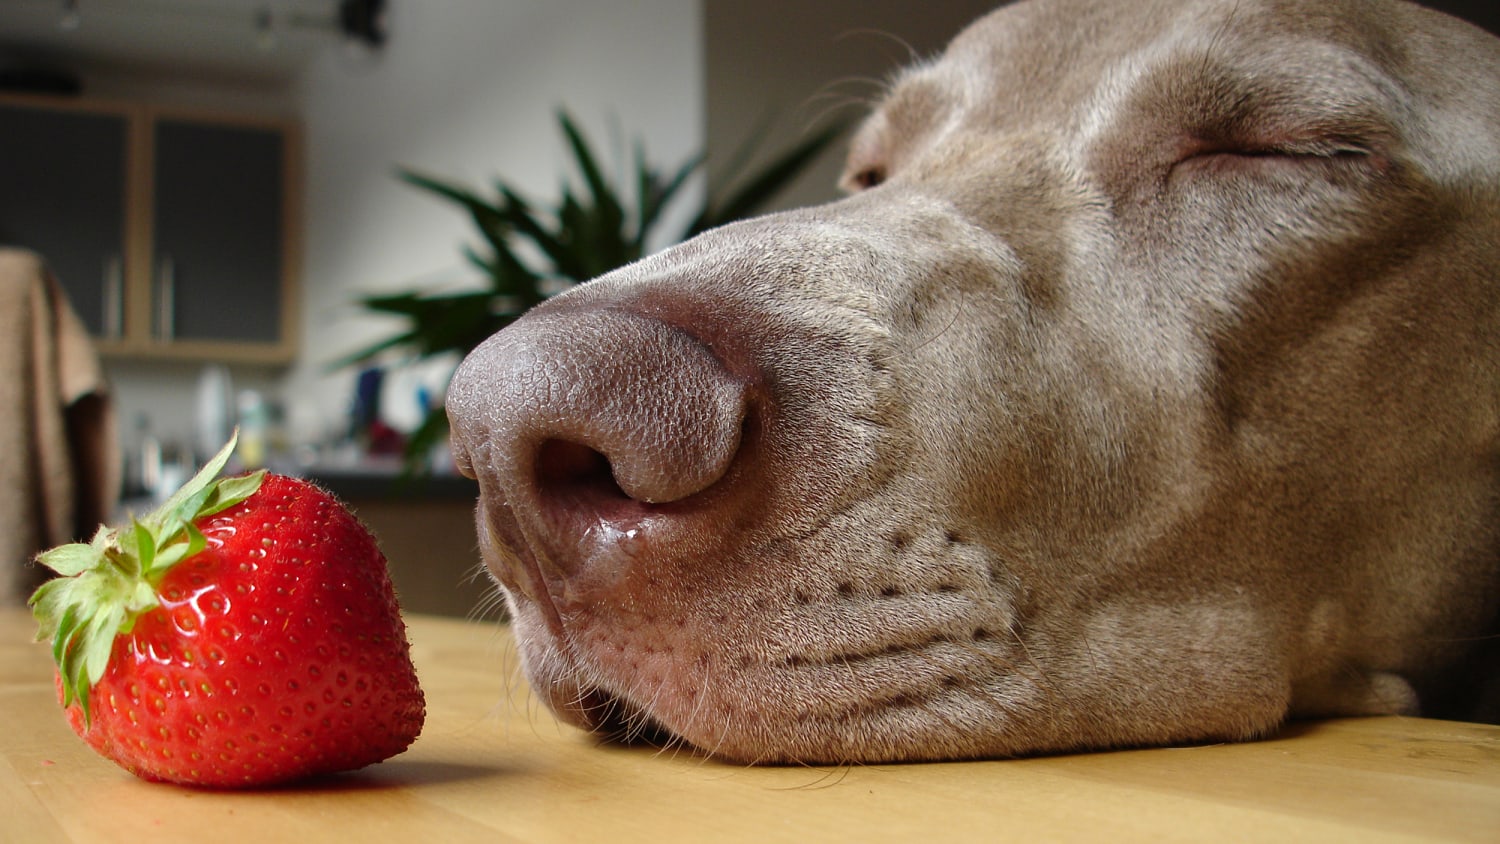 what fruits and vegetables are not good for dogs